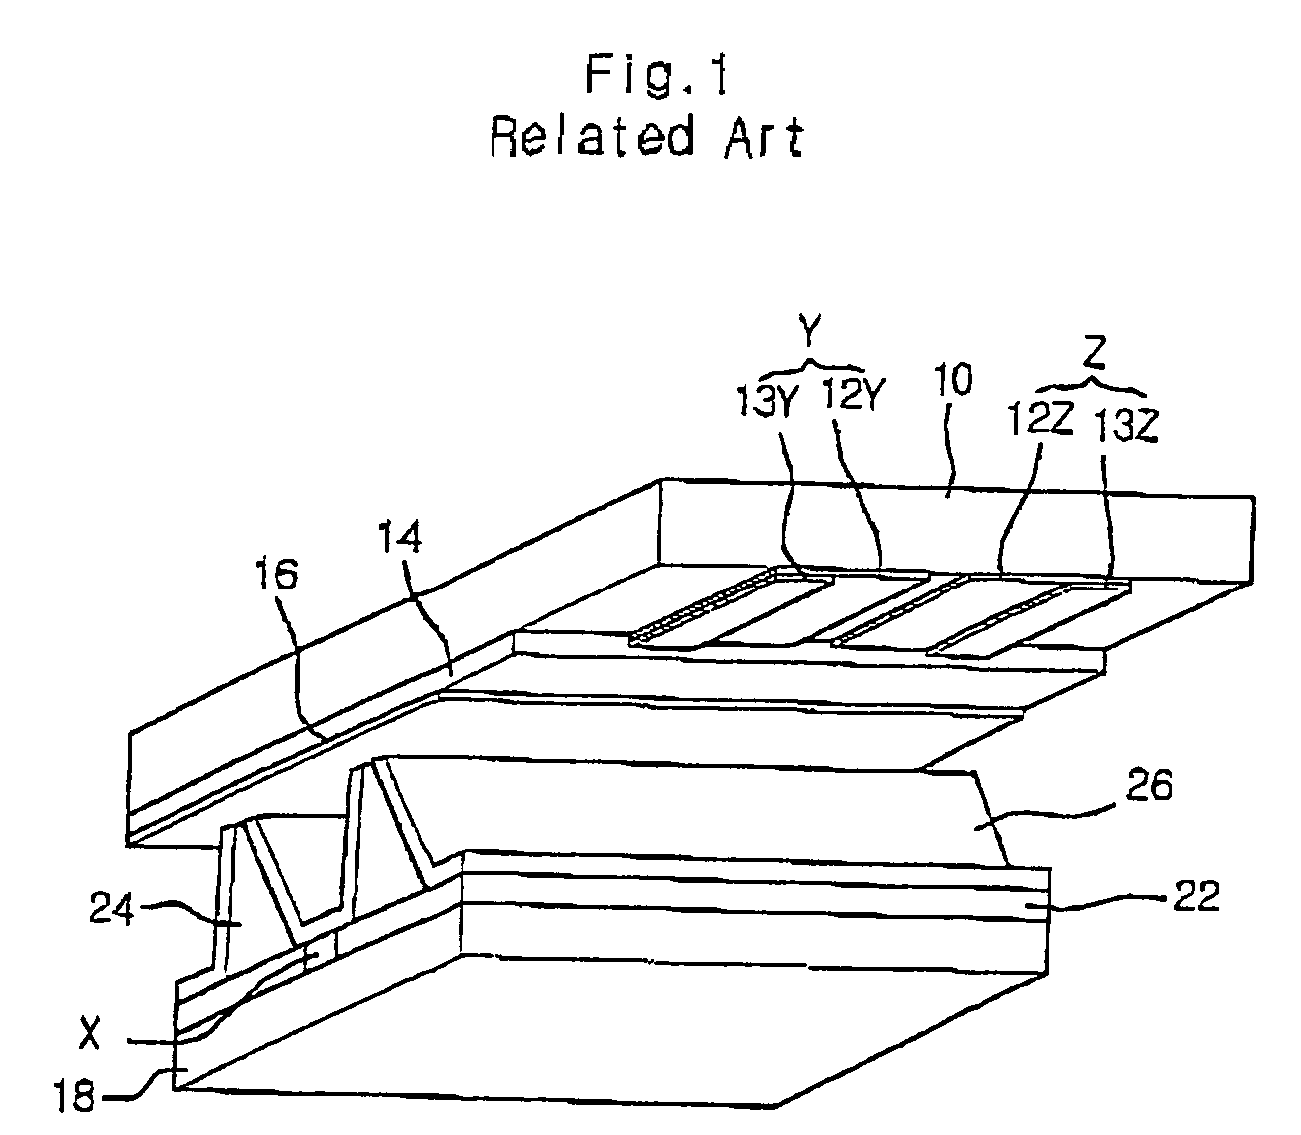 Front filter, and plasma display apparatus having the same